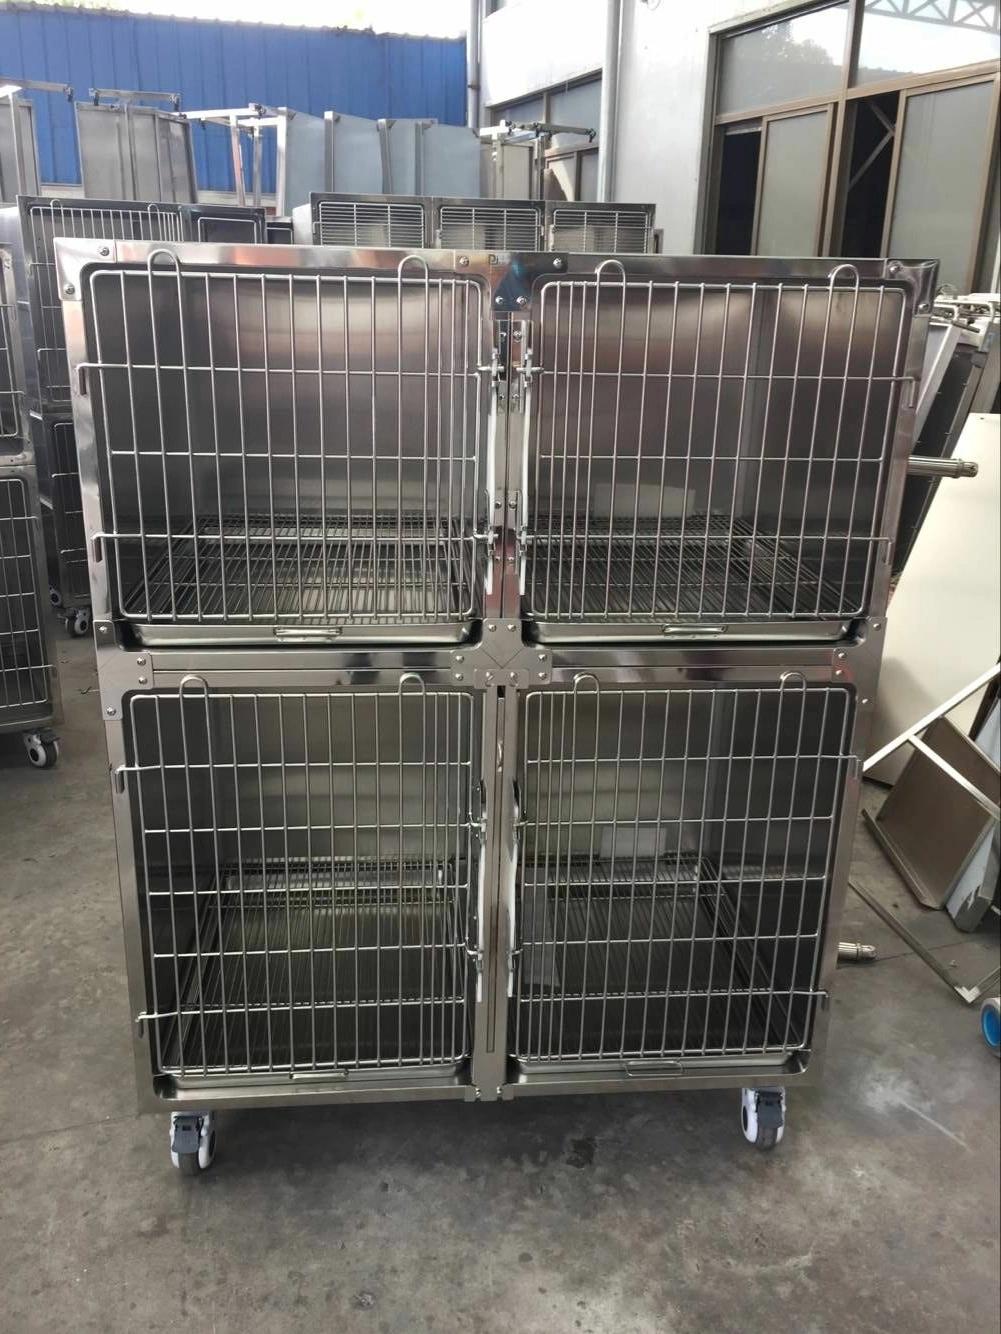 Stainless Steel Big Pet Cages Carriers Houses and Injection Veterinary Animal Cage for Veterinary Hospital or Clinic